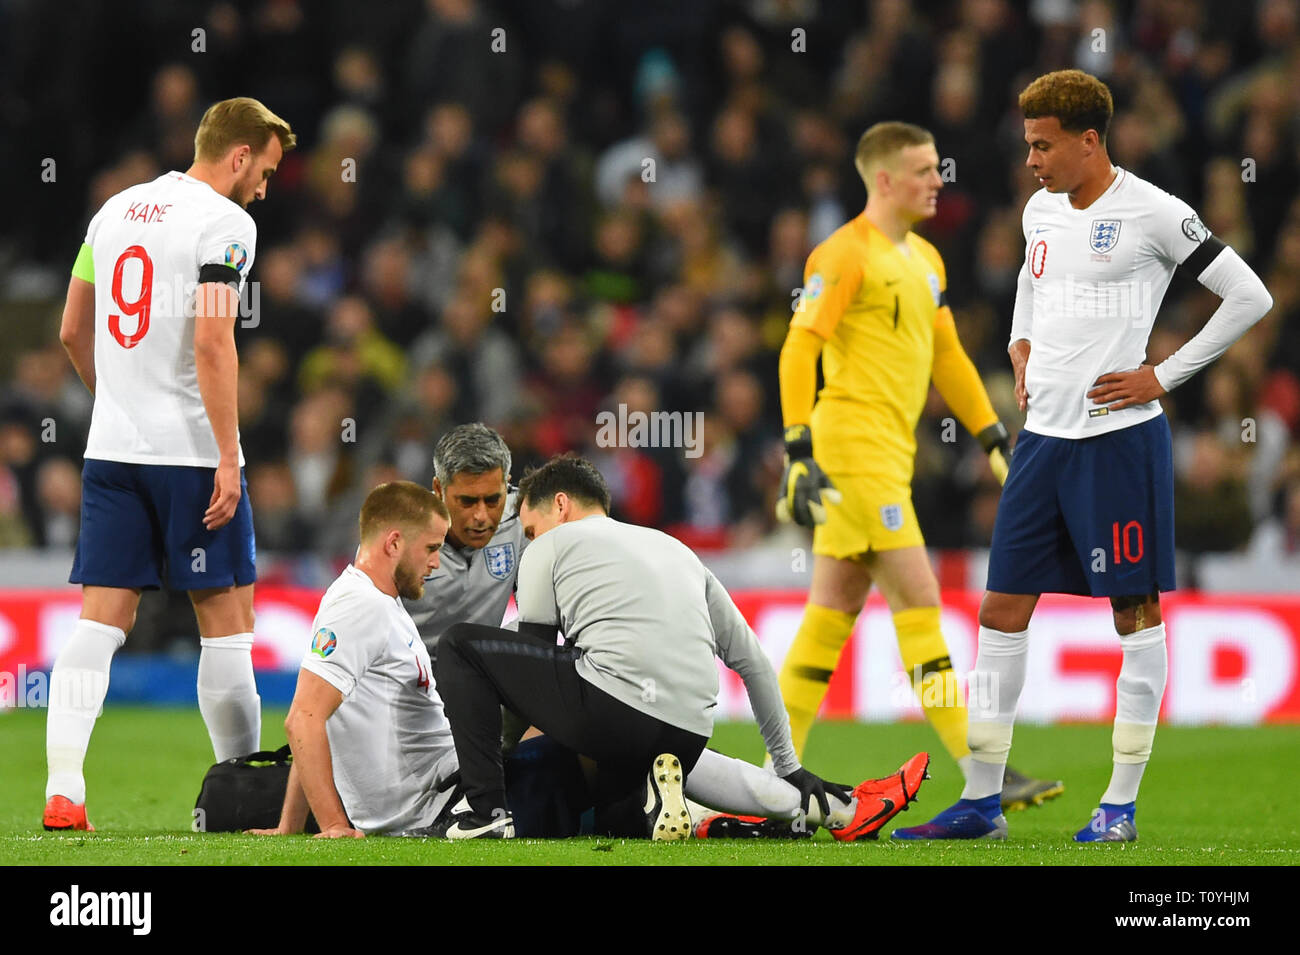 London, UK. 22nd Mar, 2019. England midfielder Eric Dier goes down injures whilst his Spurs teammates look on worried during the UEFA European Championship Group A Qualifying match between England and Czech Republic at Wembley Stadium, London on Saturday 23rd March 2019. (Credit: Jon Bromley | MI News ) Credit: MI News & Sport /Alamy Live News Stock Photo